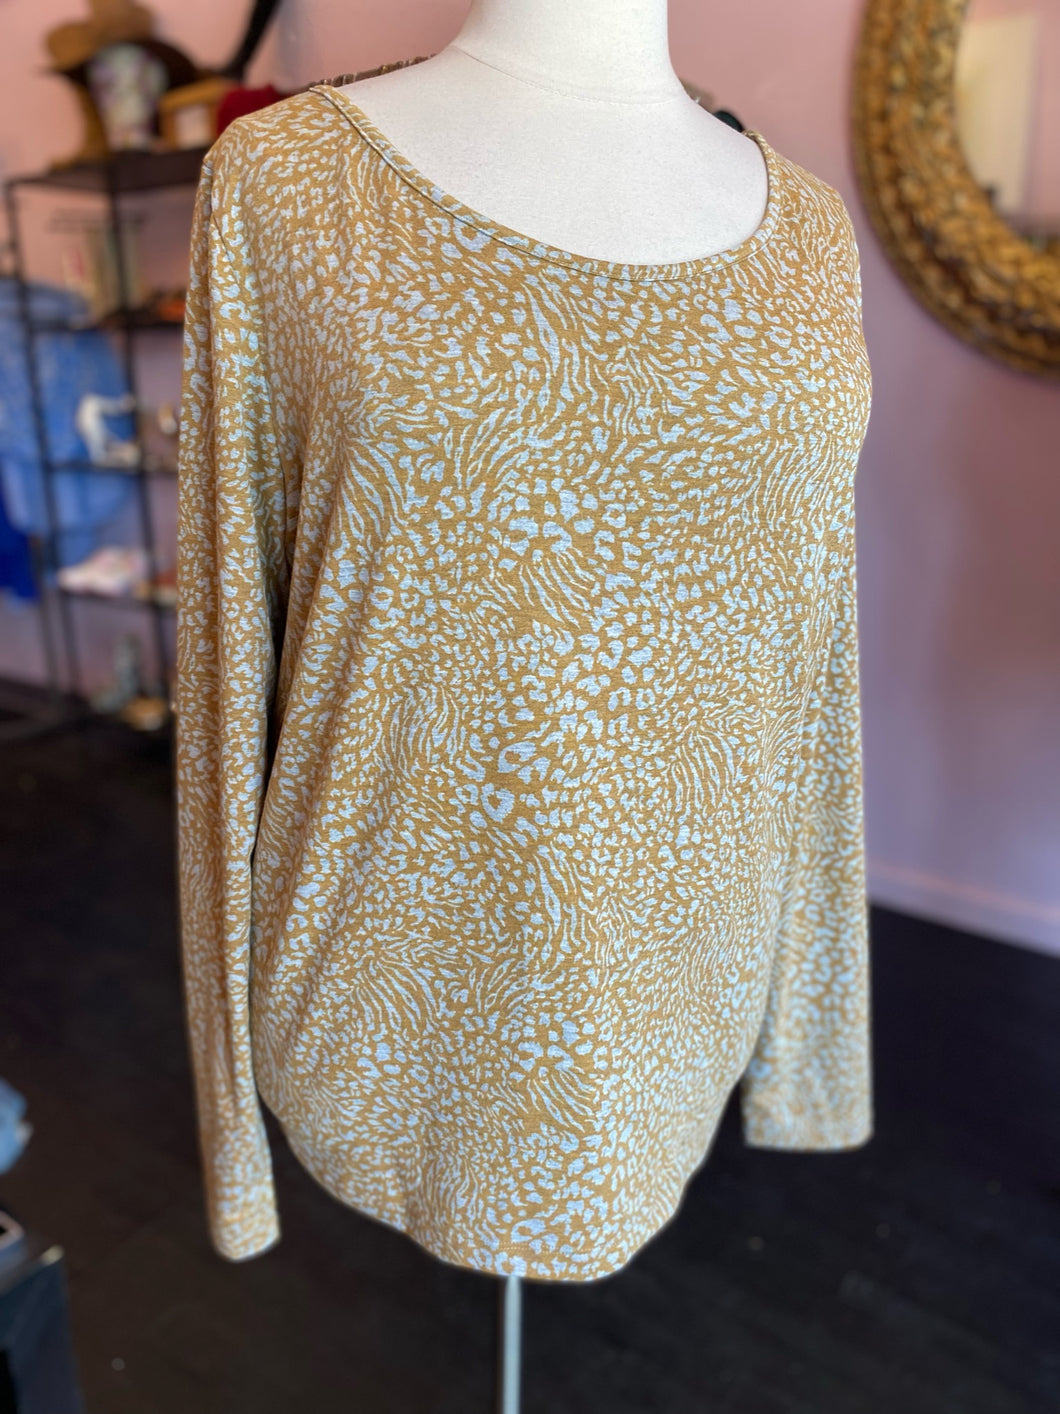 Zelie for She Yellow and Gray Animal Print Long Sleeve Top, Size 2X & 3X Available!